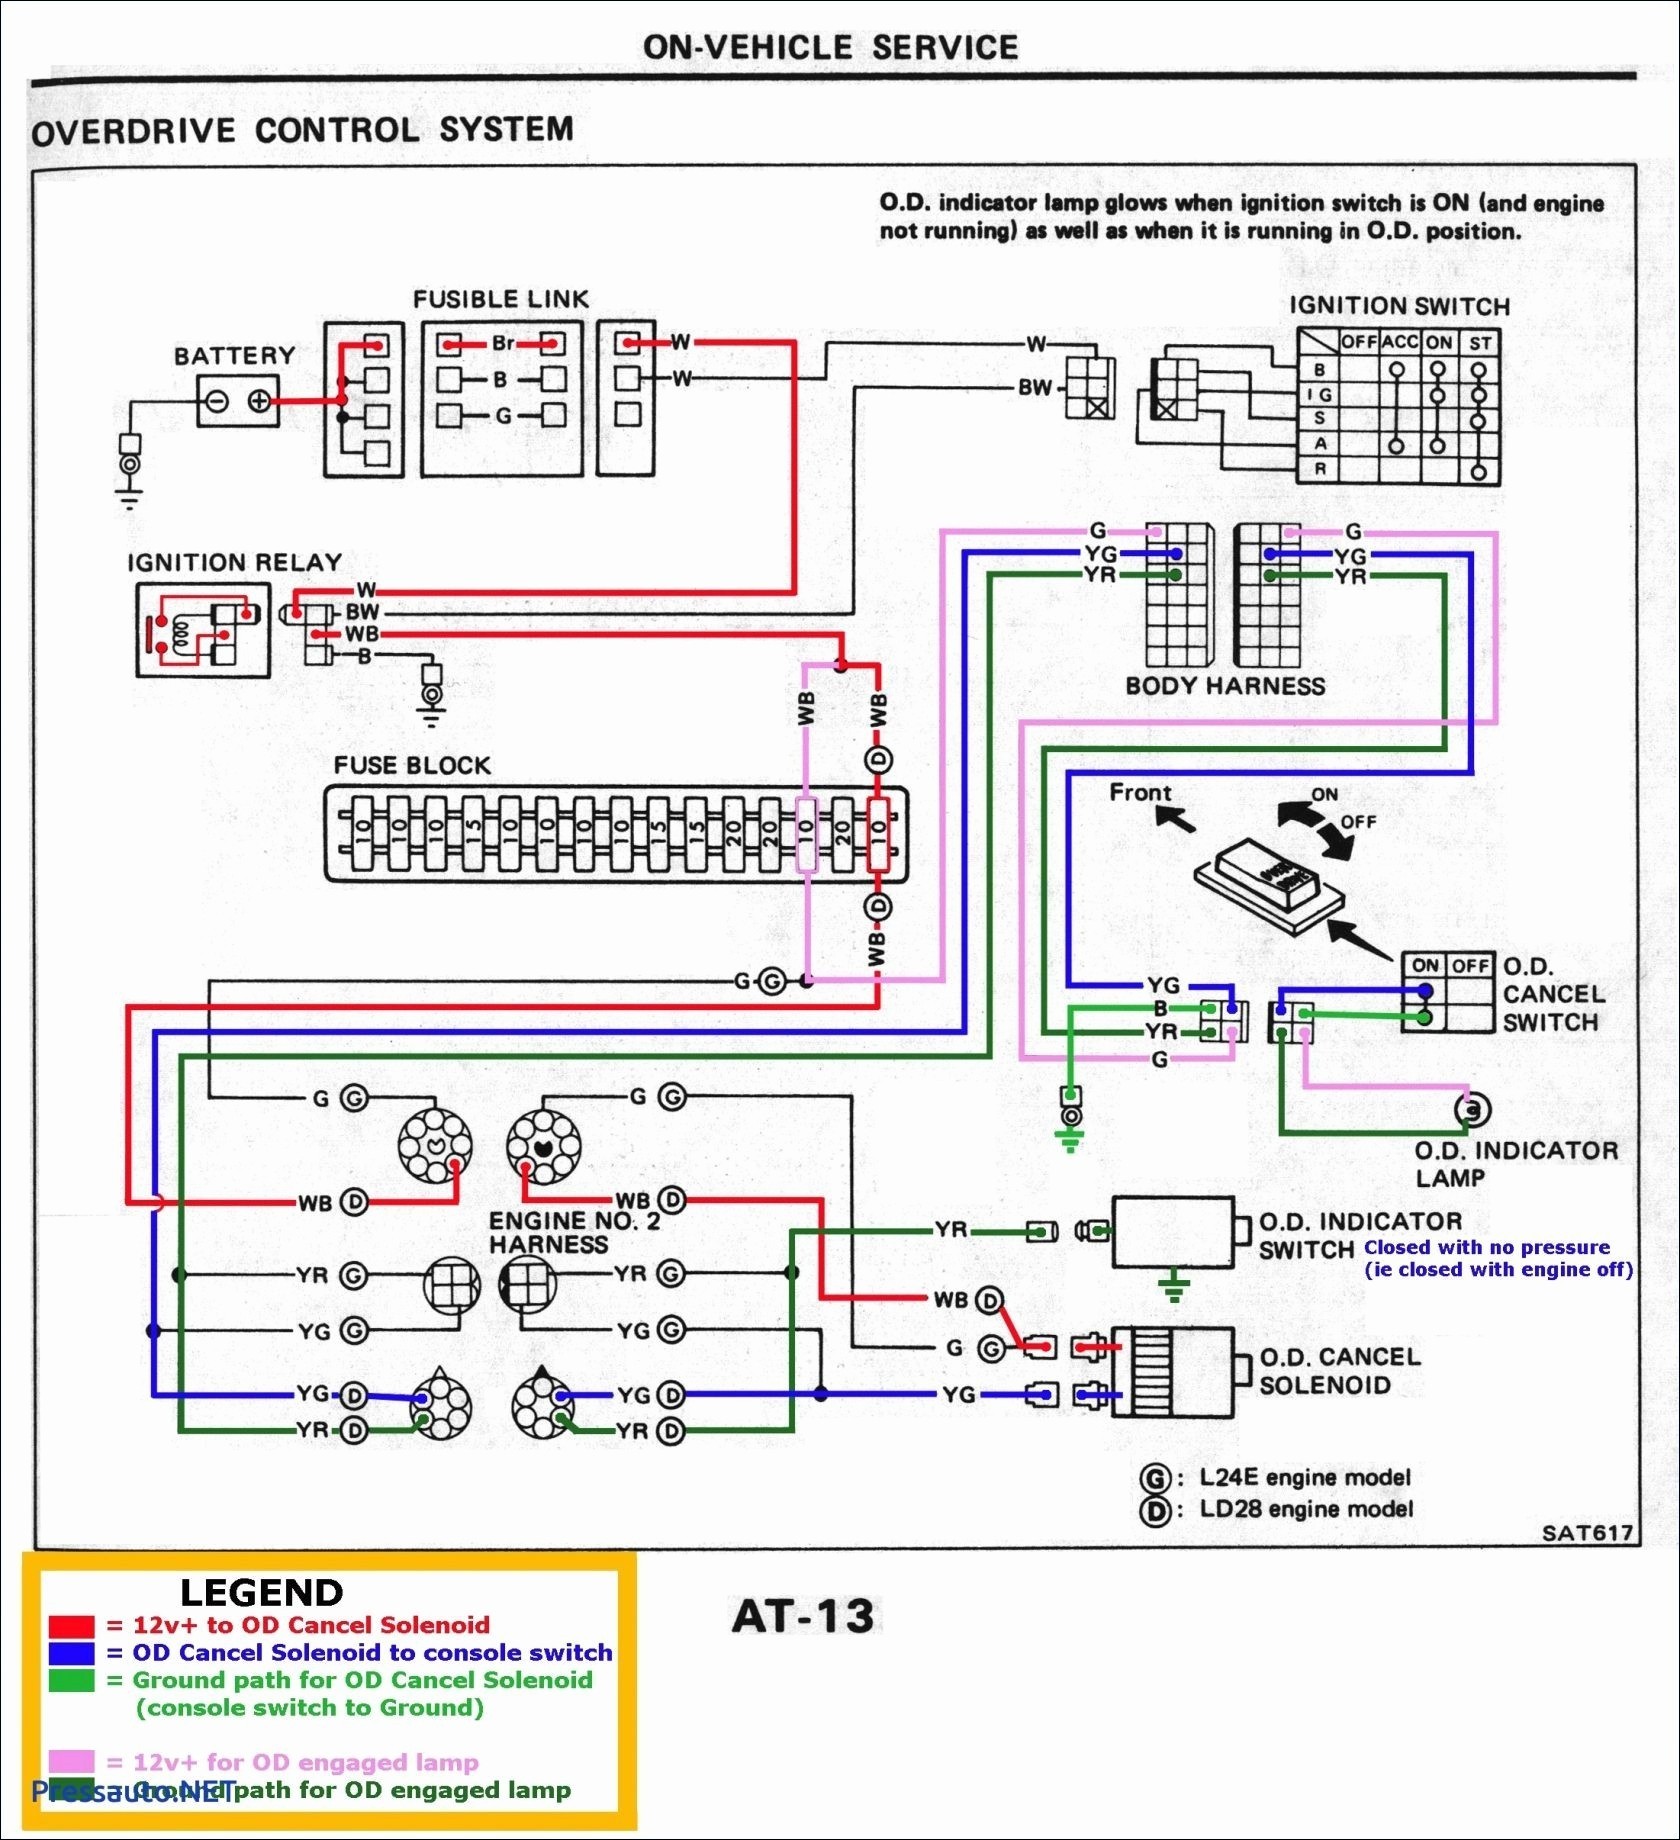 Cat6 Cable Wiring Diagram Cat5 Home Wiring Diagram Wiring Diagram 500 Of Cat6 Cable Wiring Diagram